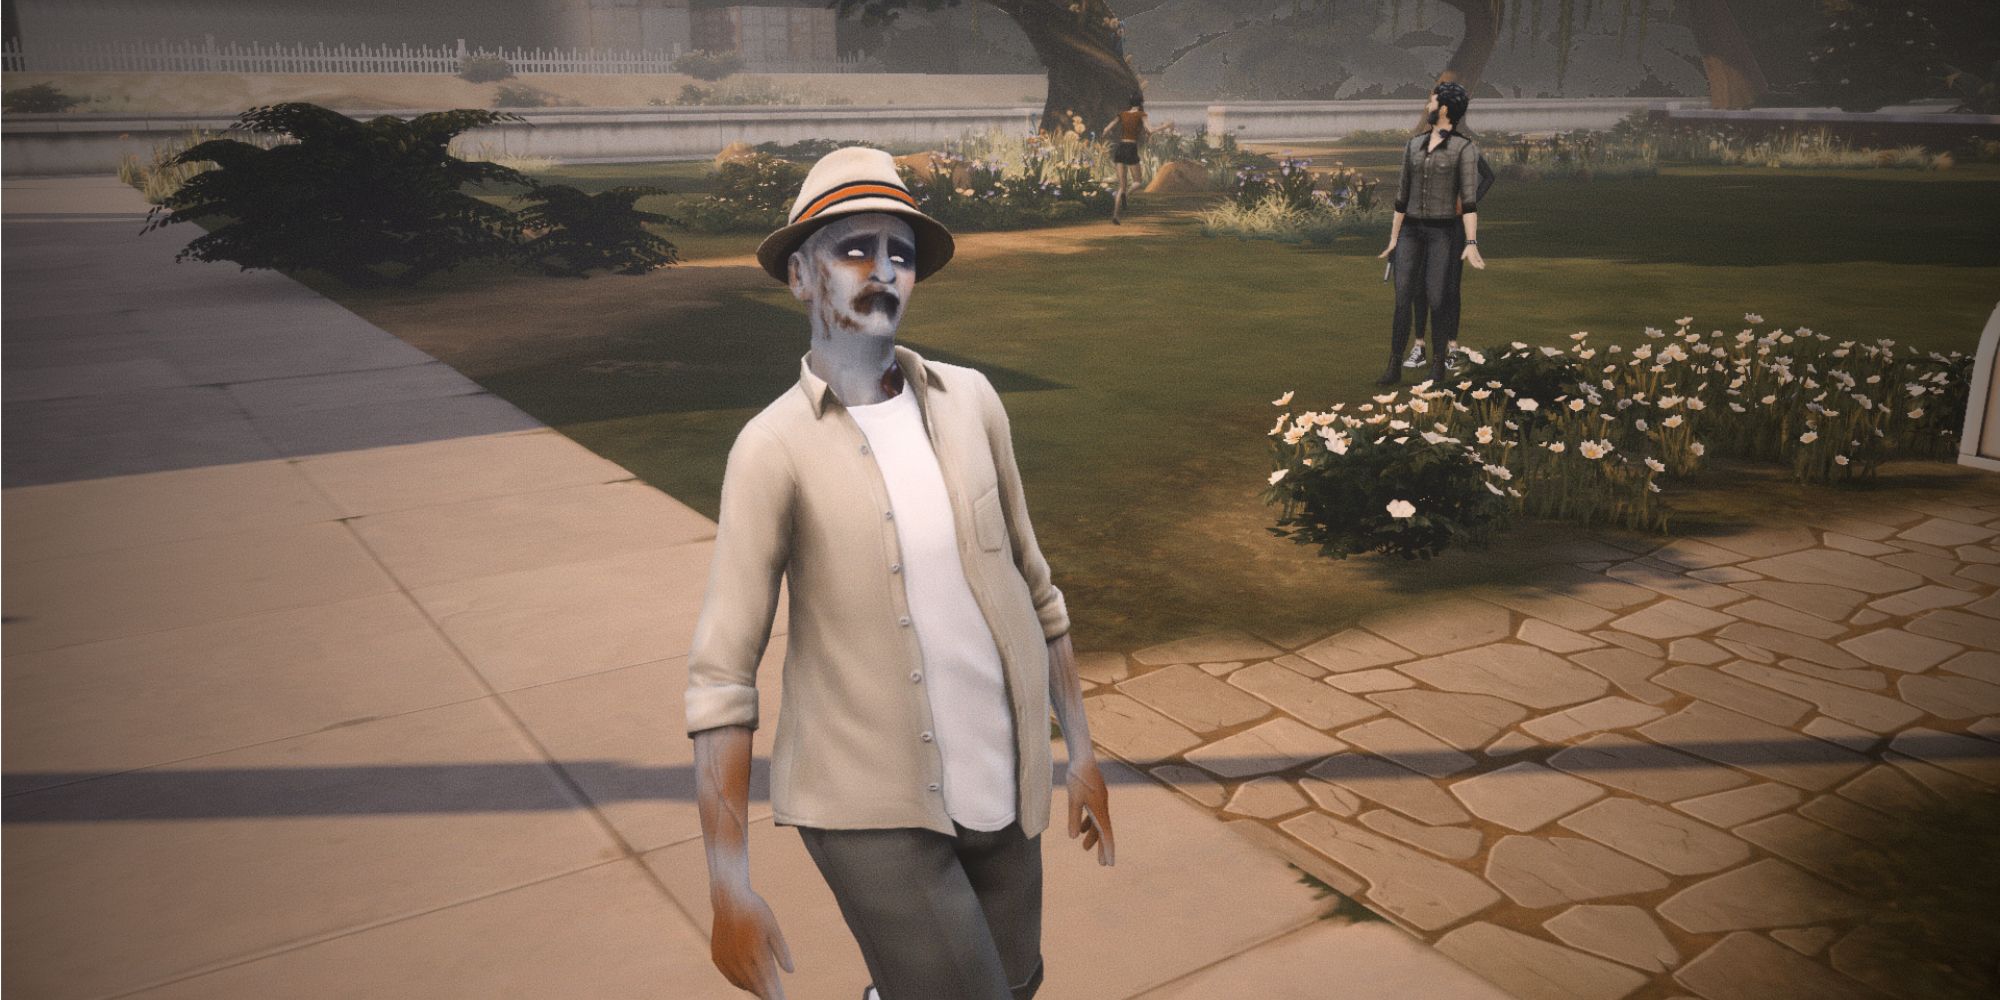 A zombie walking past Joel in The Sims 4